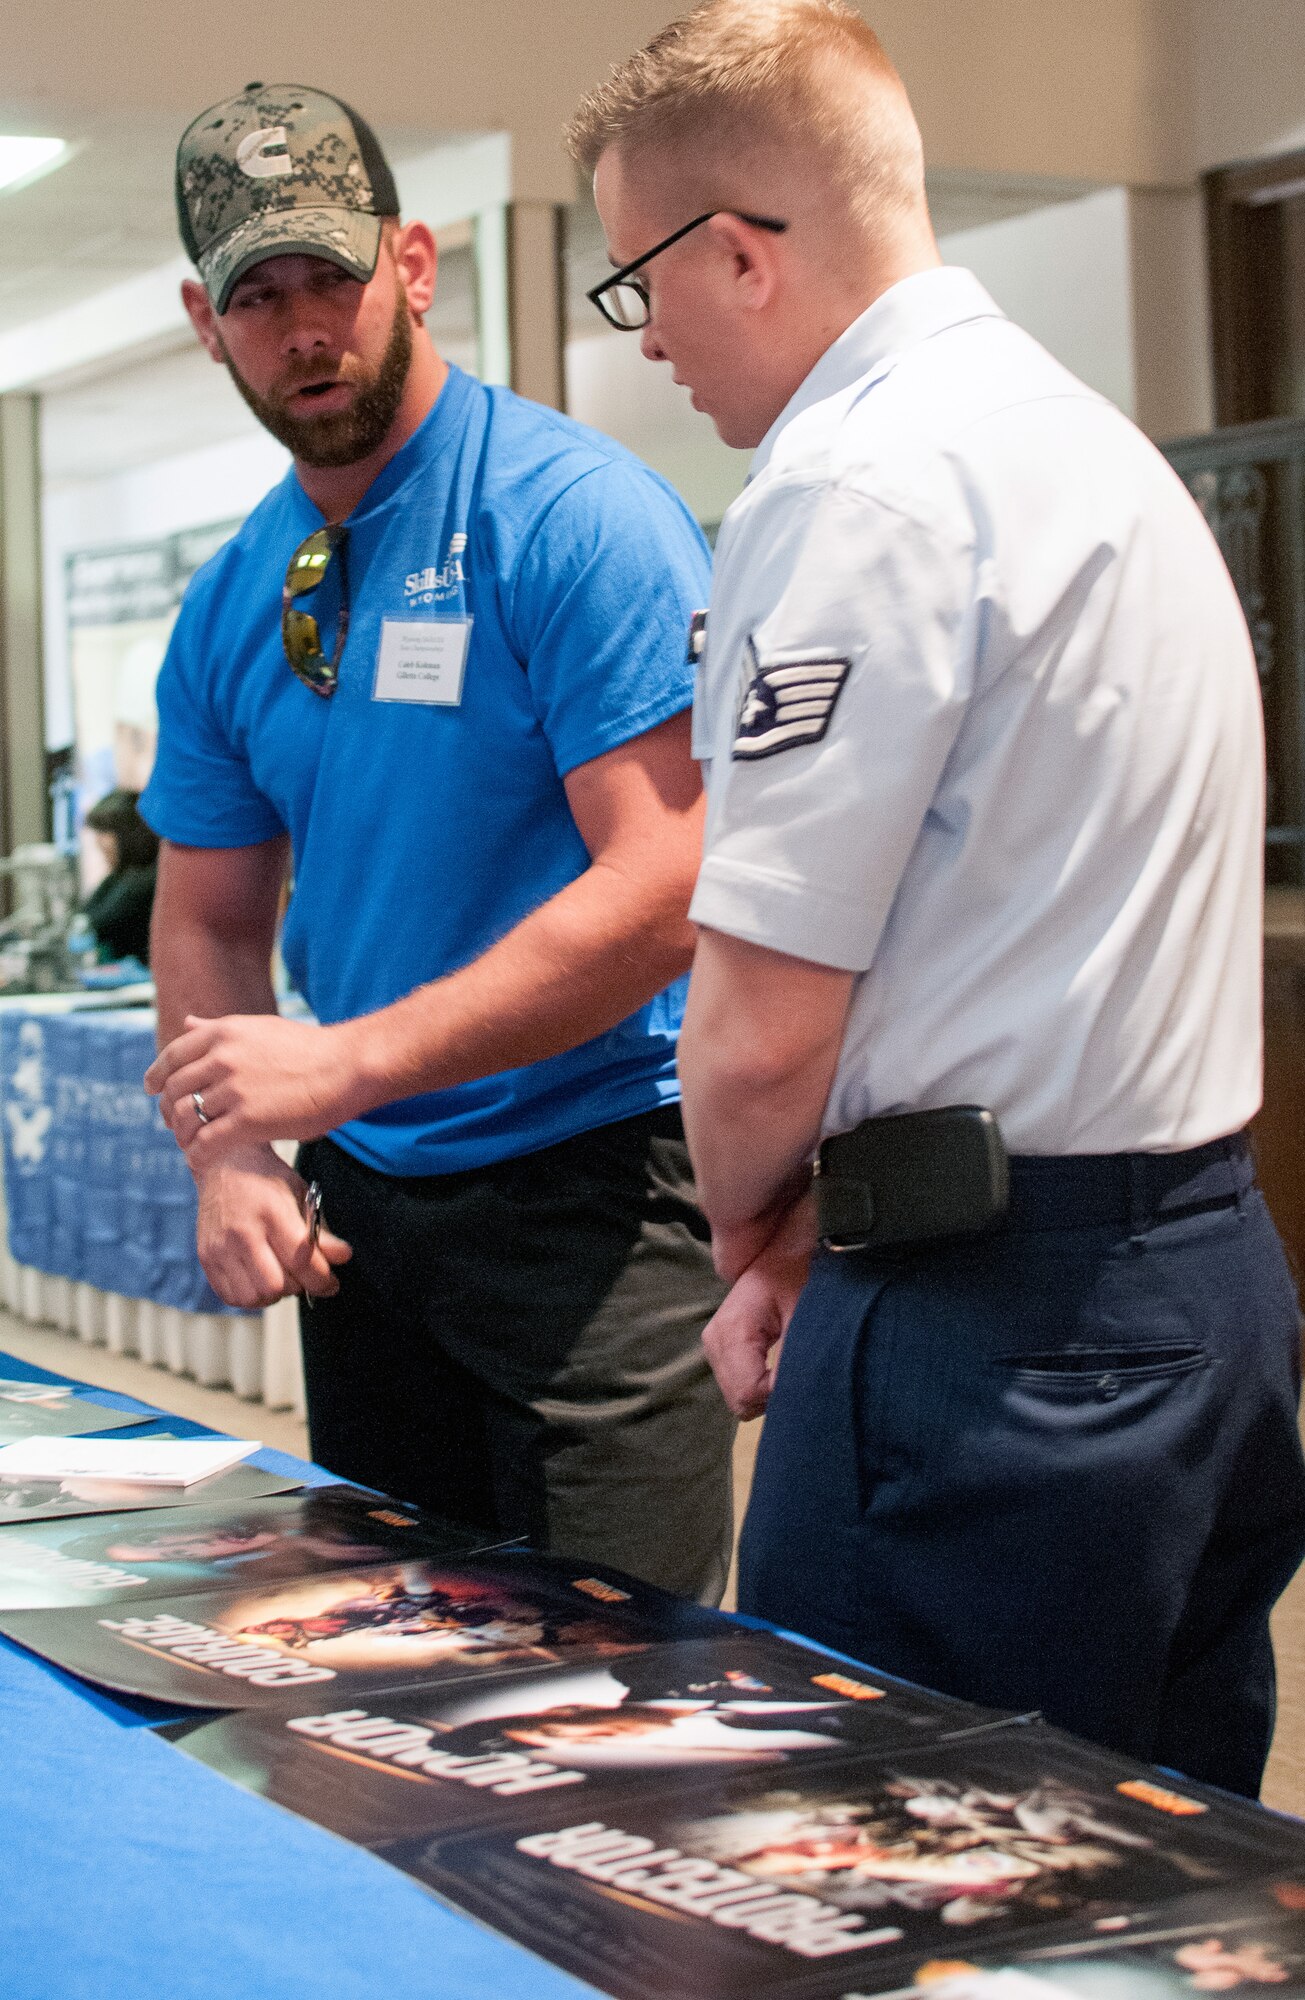 U.S. Air Force Staff Sgt. Michael Palmer, Wyoming Air National Guard recruiter discusses enlistment opportunities with potential enlistees during the SkillsUSA competition, Apr. 13, 2015 in Casper, Wyoming. SkillsUSA Wyoming is a career-technical student organization serving students in secondary and post-secondary technical, skilled, service, and health occupations. (U.S. Air National Guard photo by Tech. Sgt. John Galvin/released)